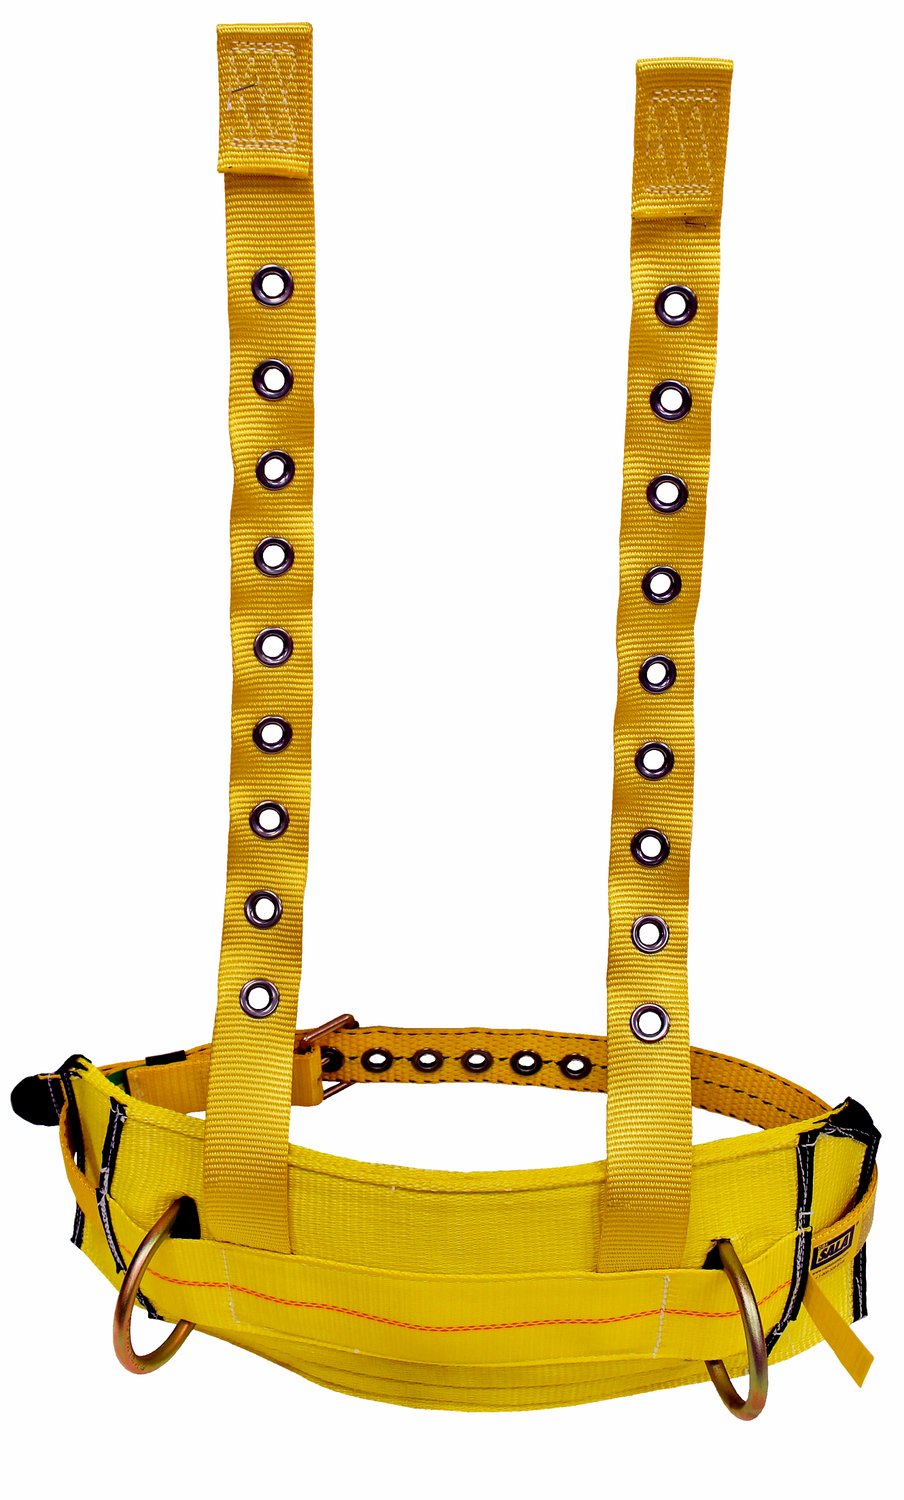 7012815134 - 3M DBI-SALA Derrick Tongue Buckle Positioning Belt with Tongue Buckle Harness Connector 1003224, Yellow, 3X